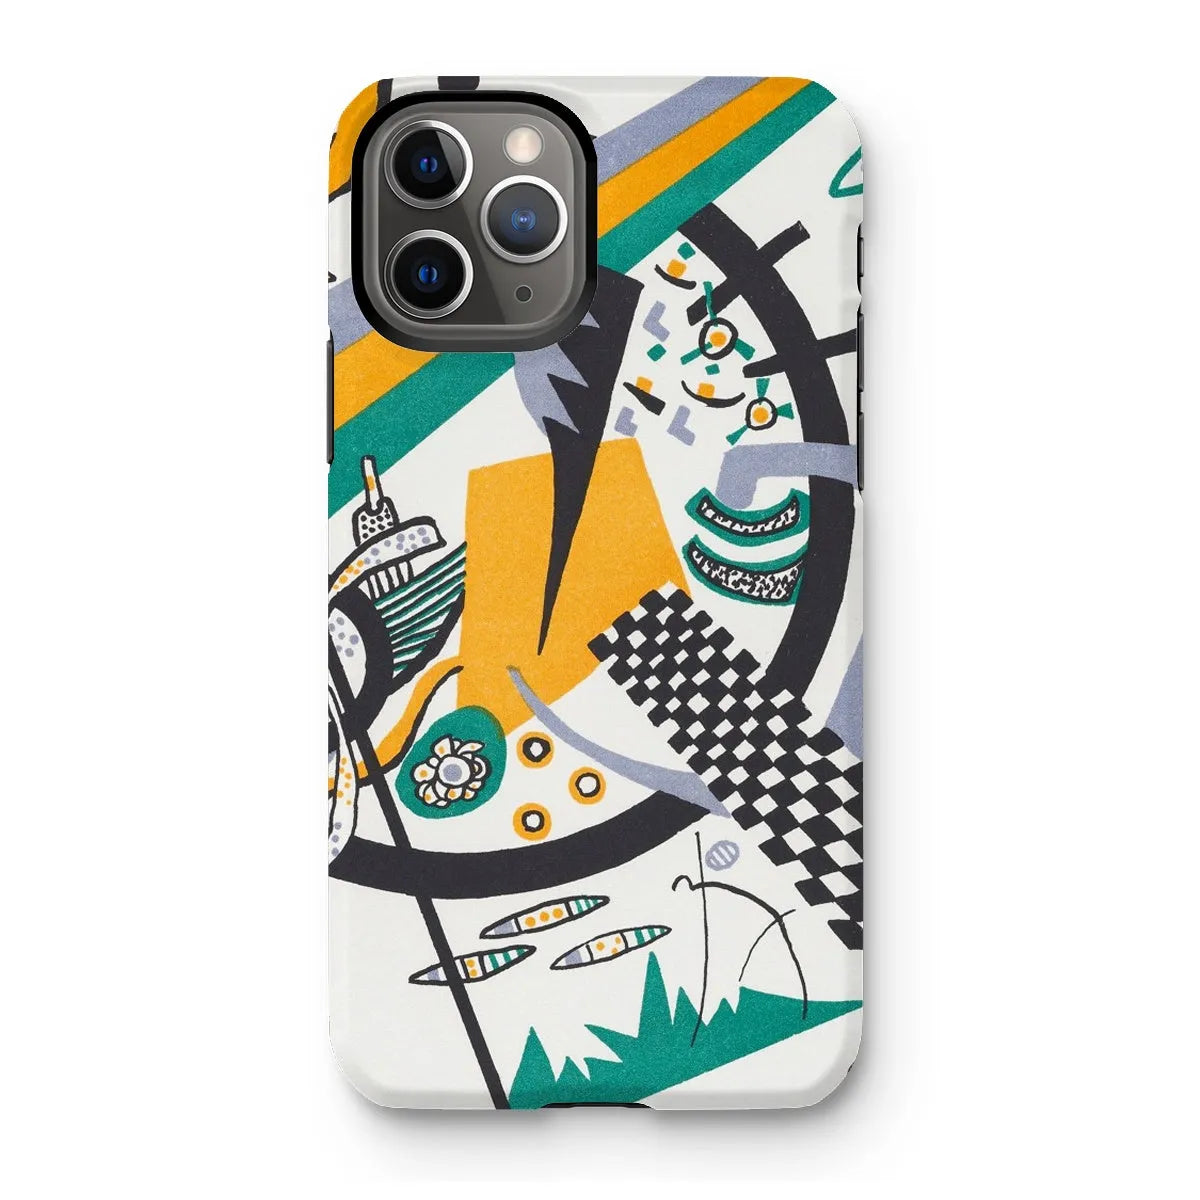 Small Worlds Iv - Expressionist Phone Case - Wassily Kandinsky - Iphone 11 Pro / Matte - Mobile Phone Cases - Aesthetic